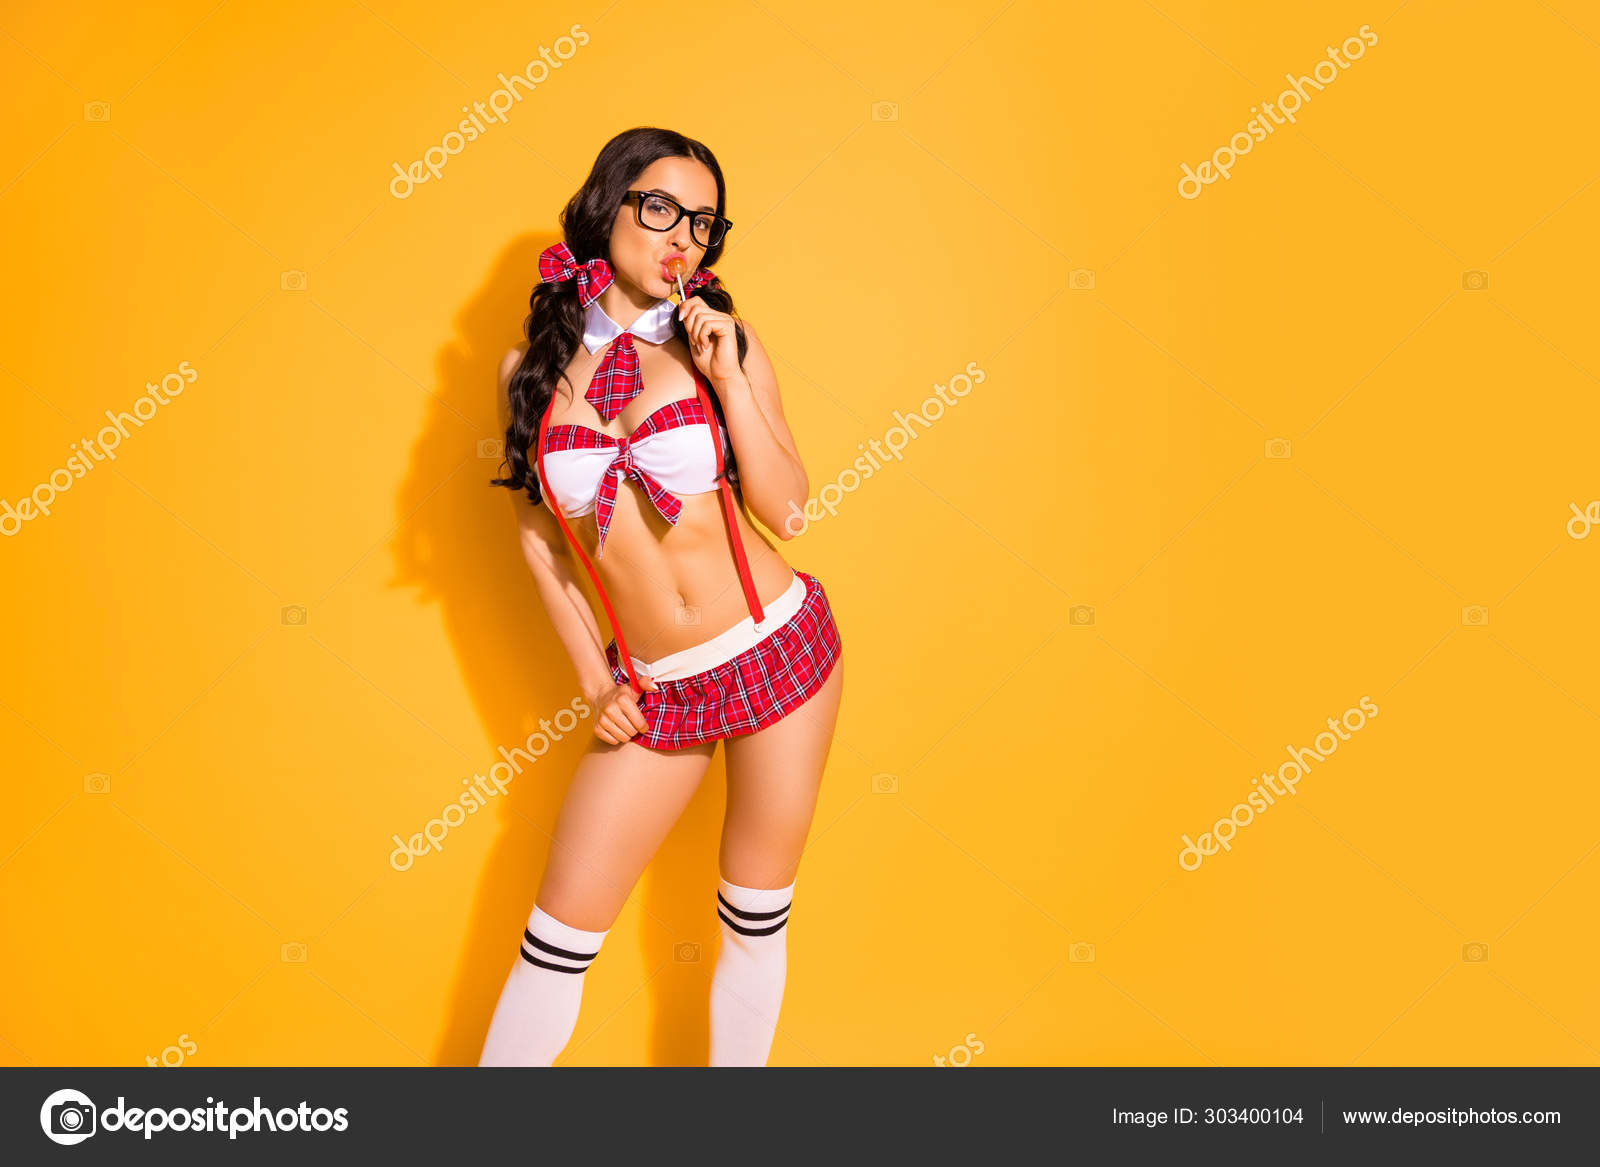 Photo of hot naked lady perfect shapes glam look hold lollipop mouth wear  red bra short skirt isolated yellow background Stock Photo by Â©deagreez1  303400104